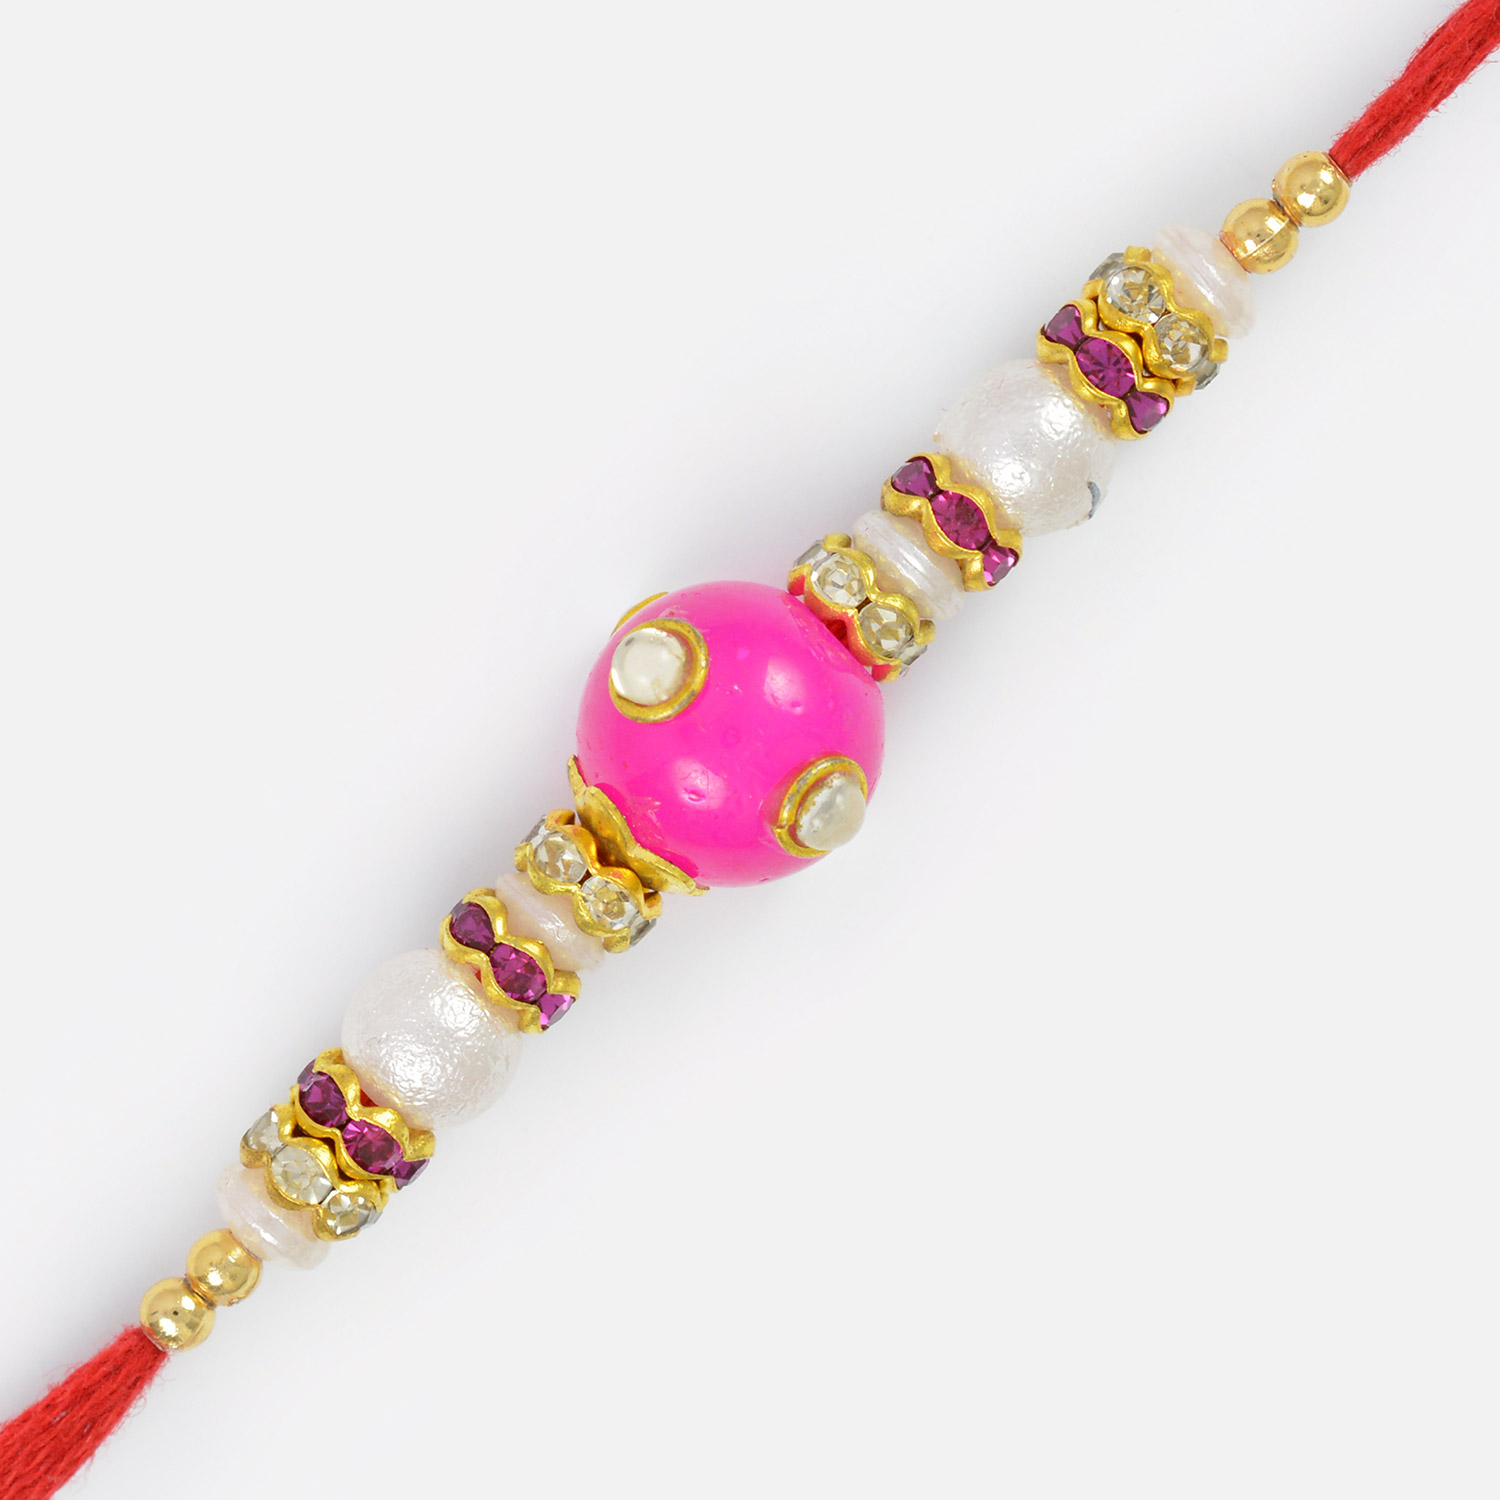 Awesome Central Pink Ball and White Pearl Rakhi Thread